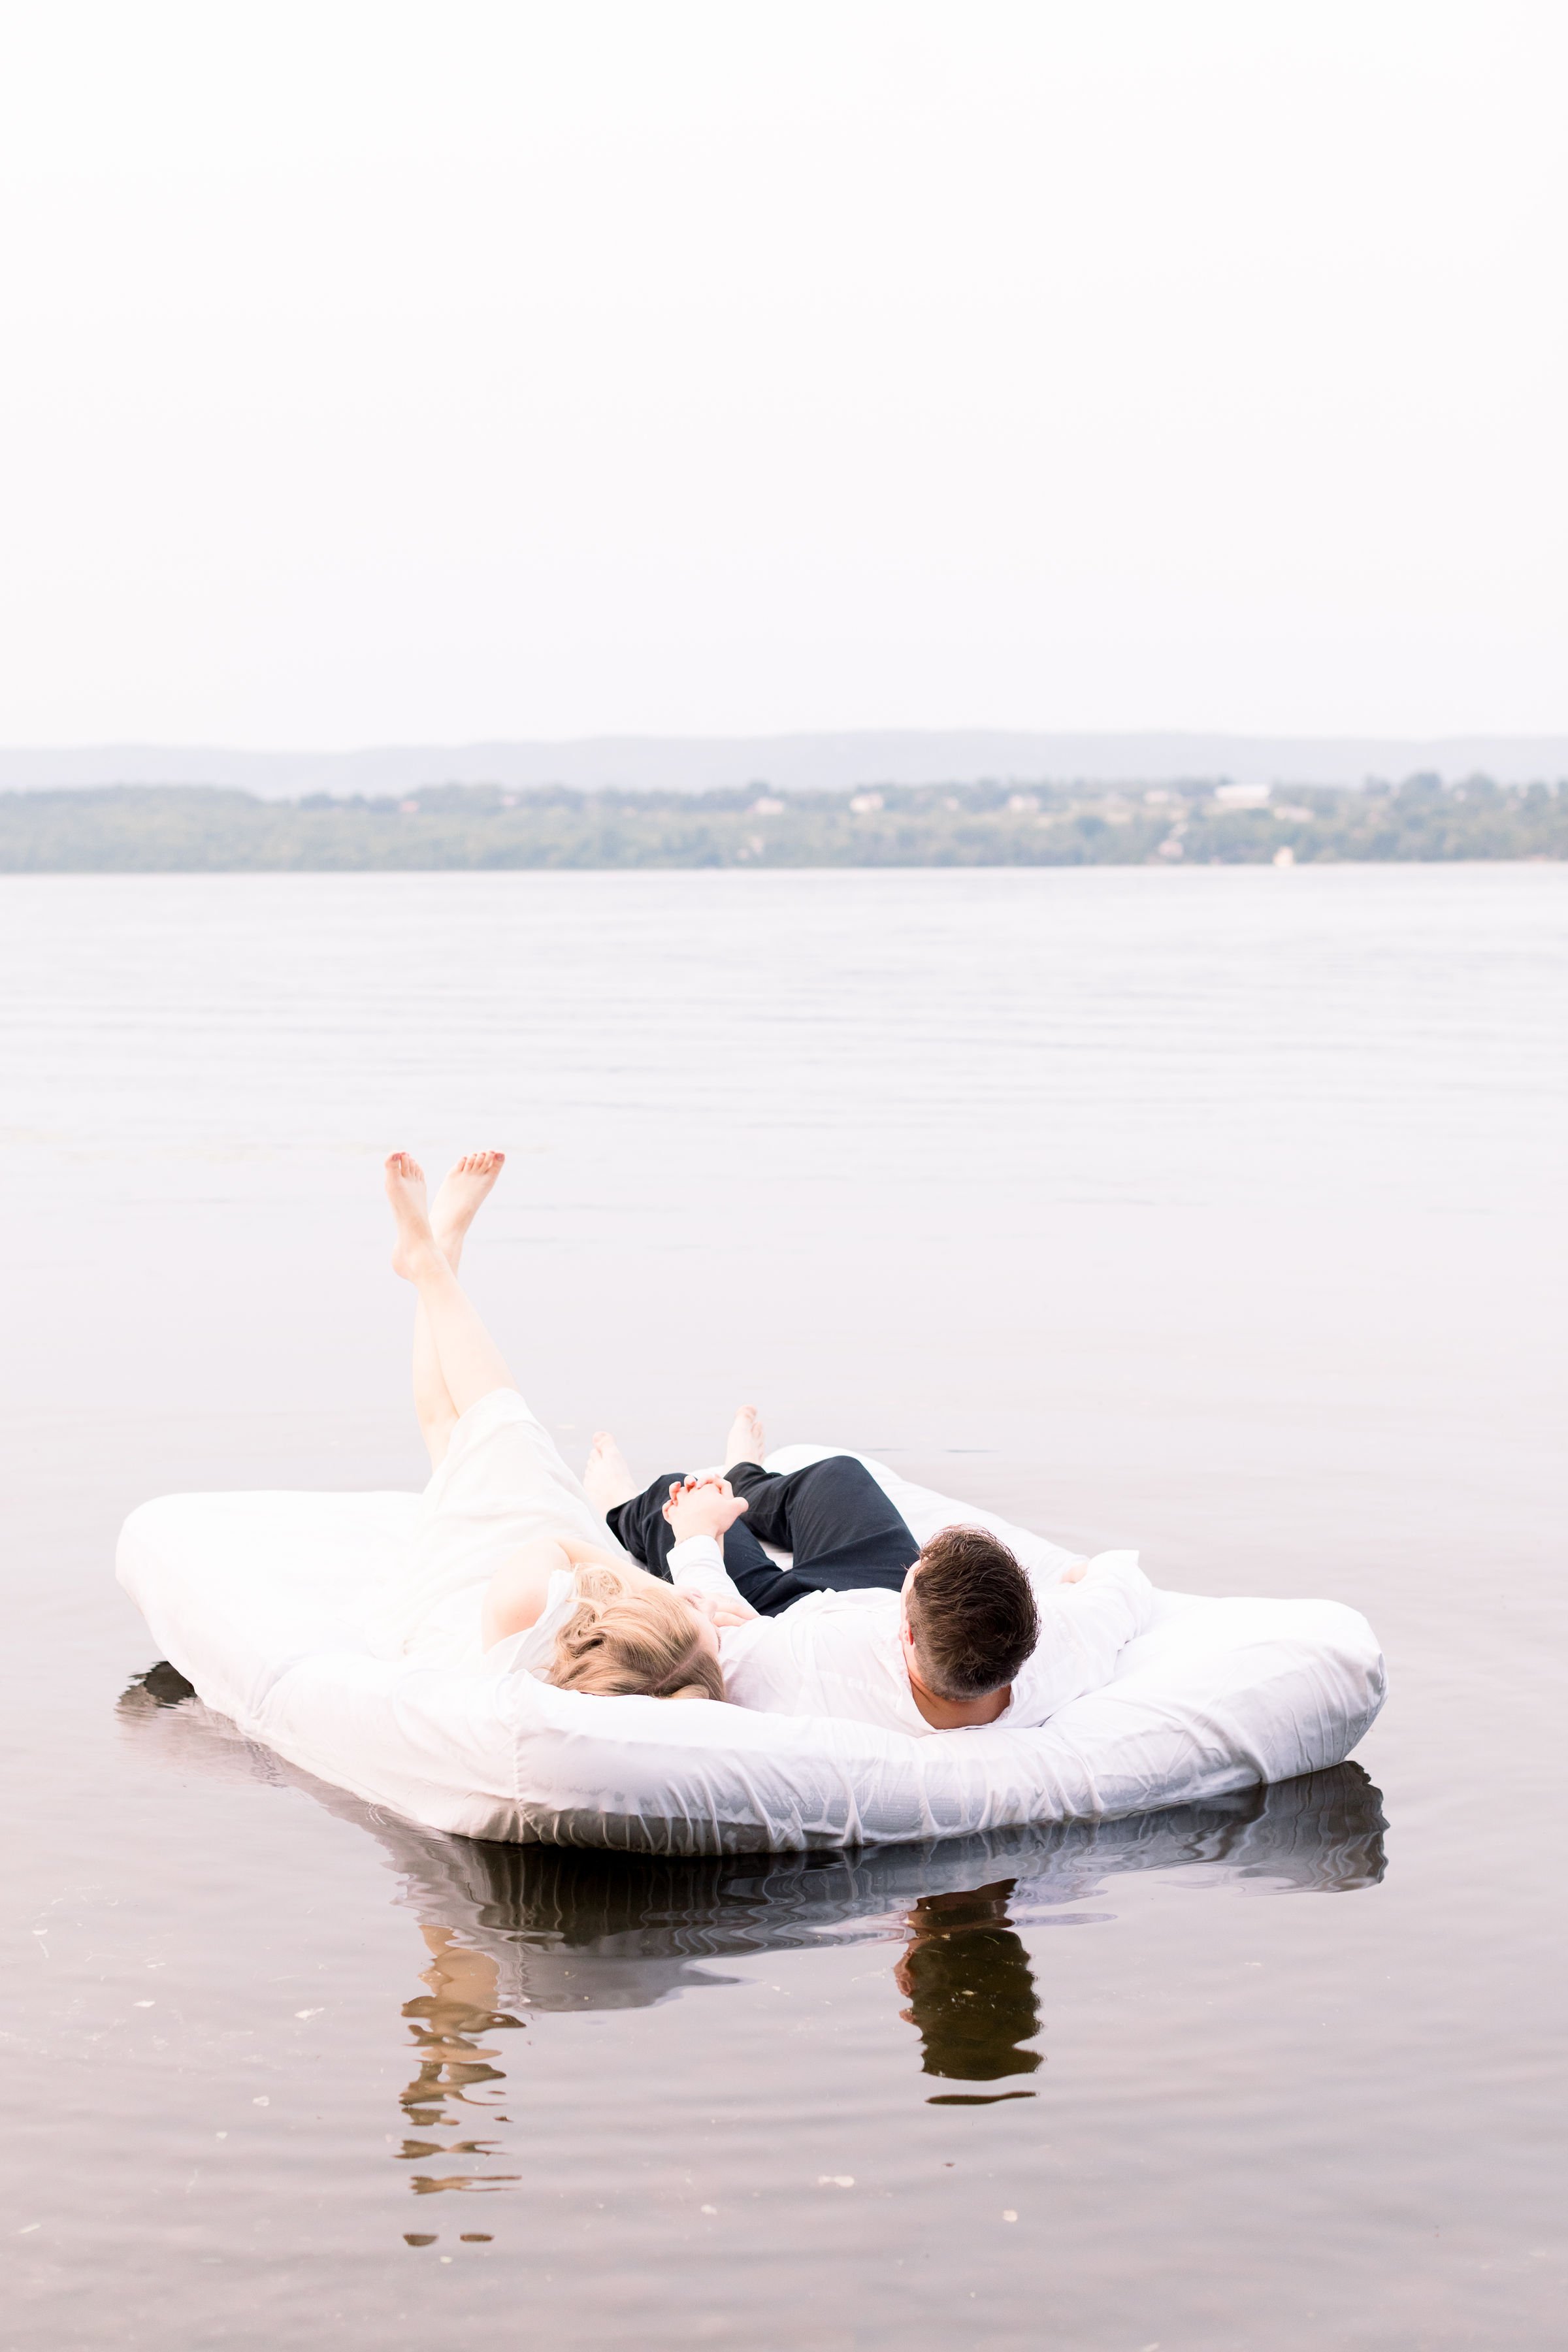  In Ottawa, a couple takes portraits while laying on a mattress on a lake by Chelsea Mason Photography. mattress on a lake unique engagements #ChelseaMasonPhotography #ChelseaMasonEngagements #PinheysPointEngagements #OttawaEngagementPhotography 